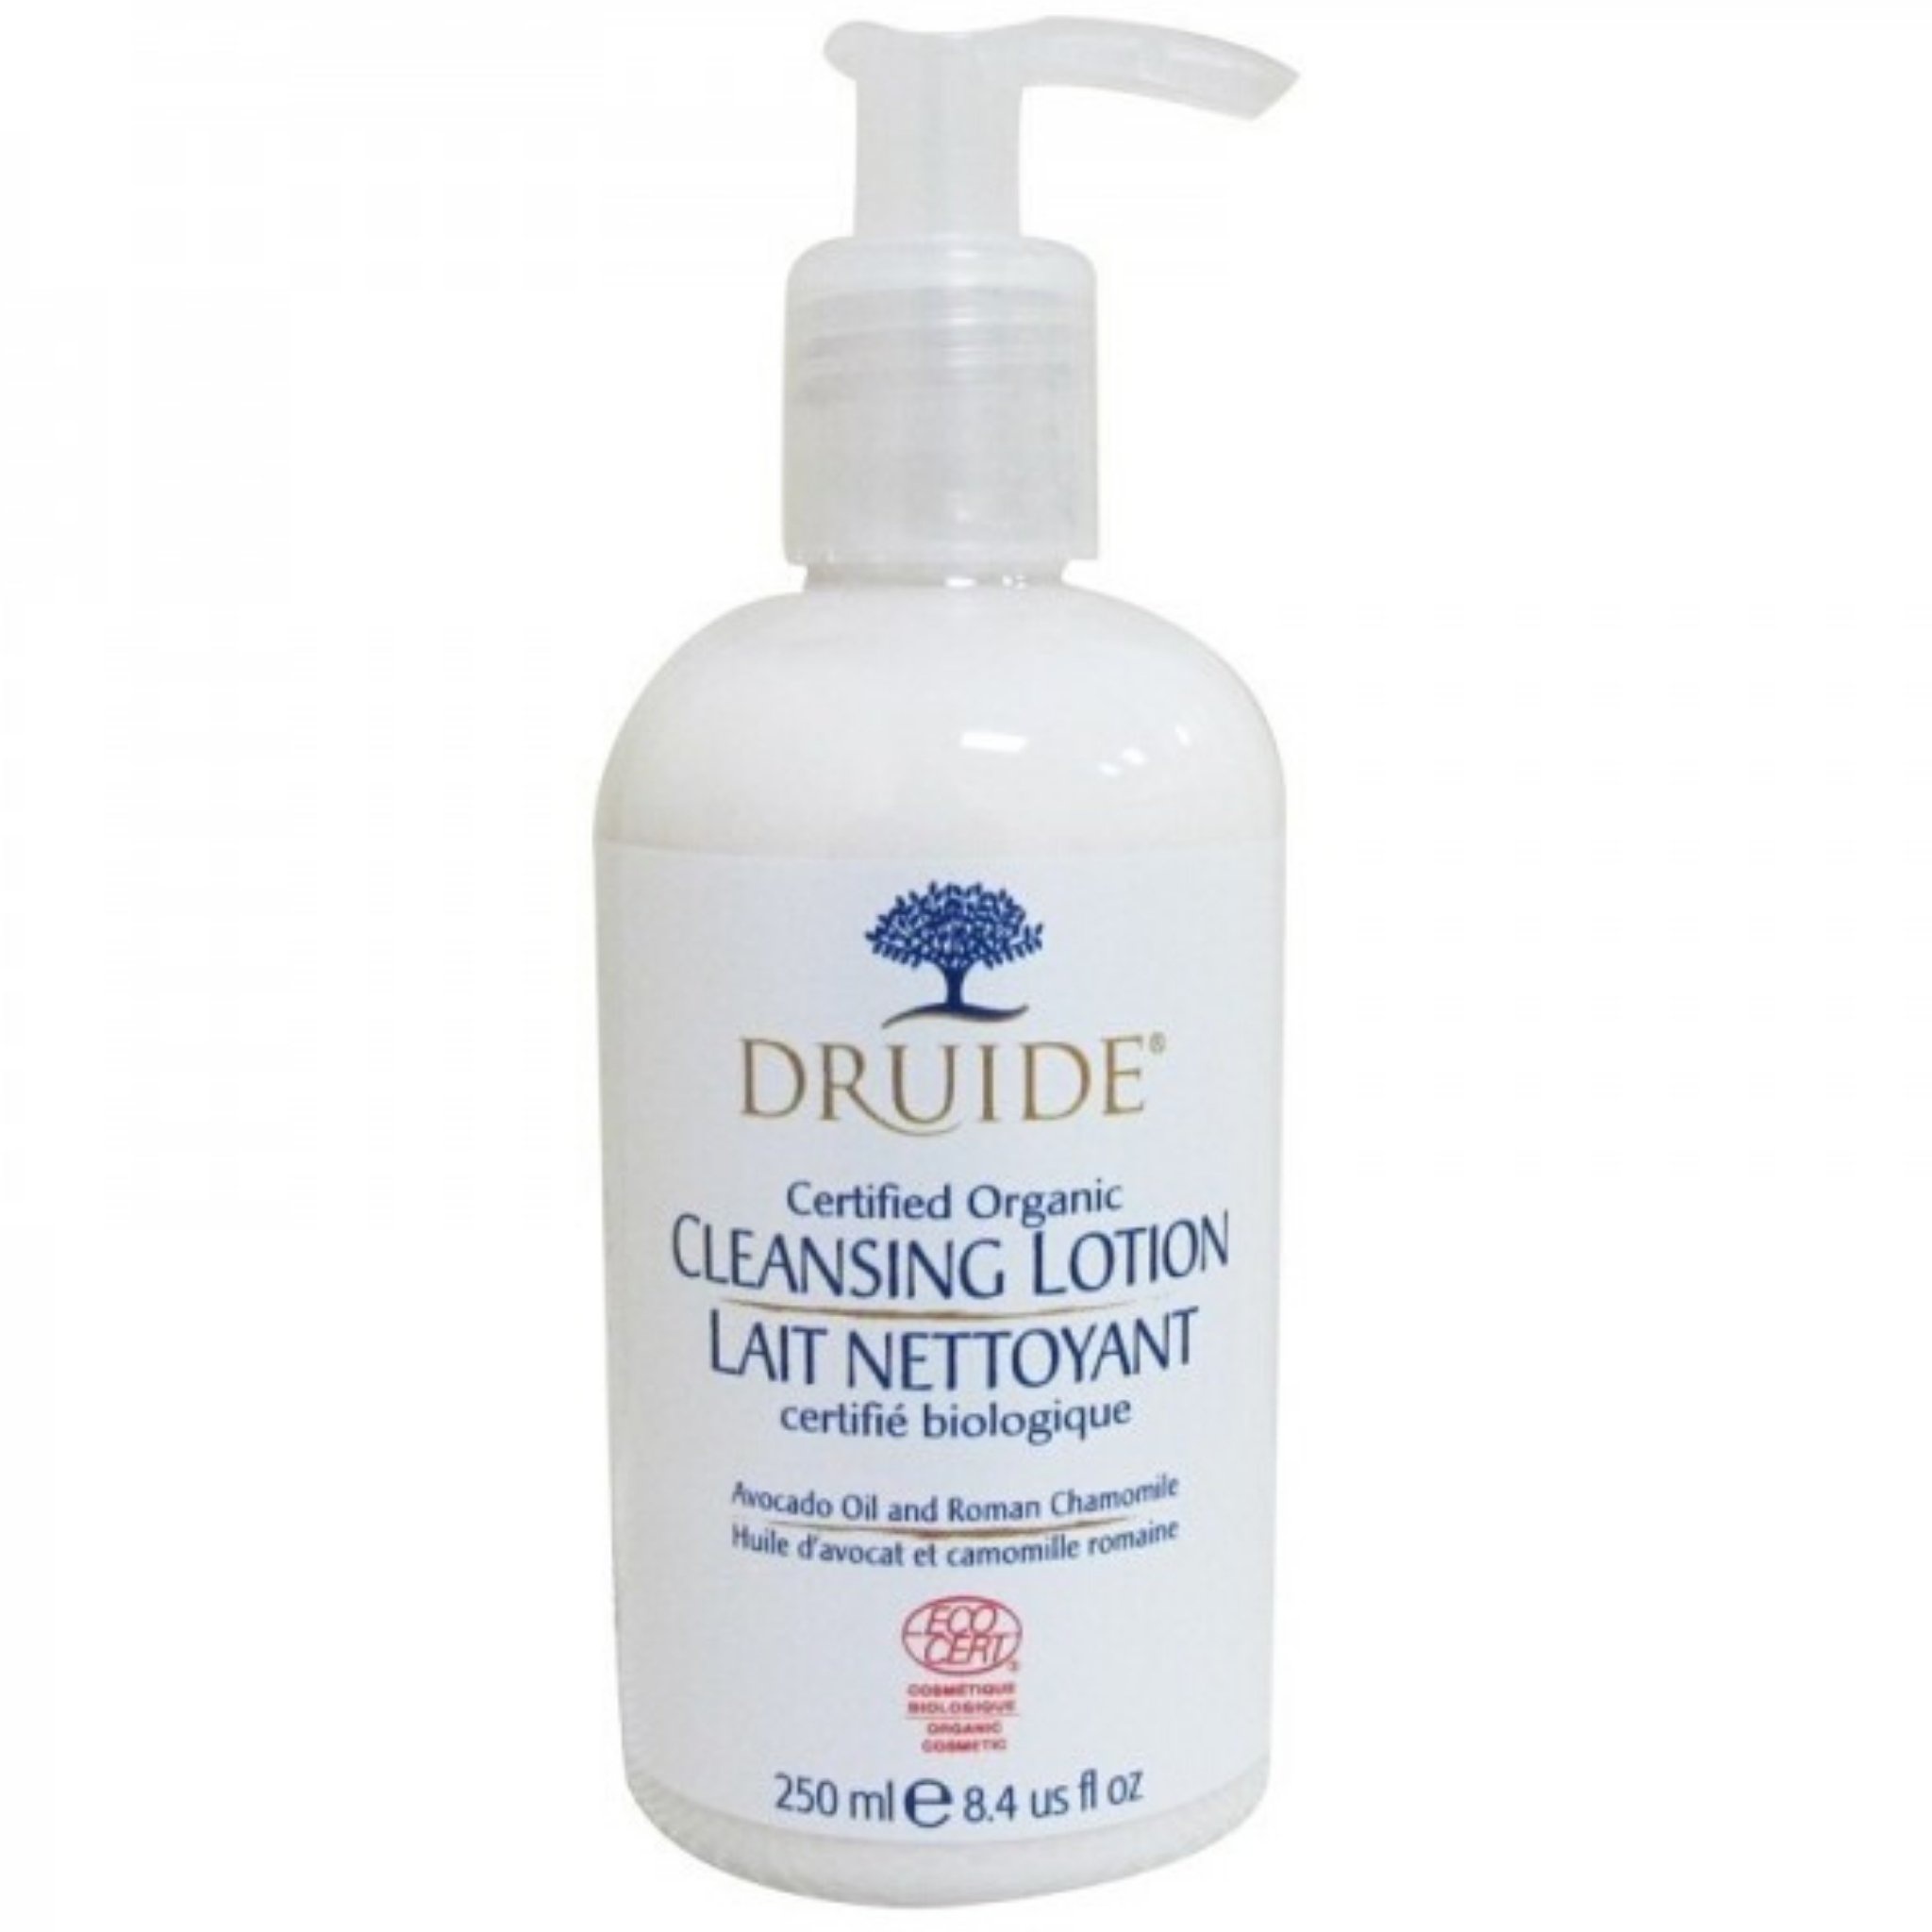 Druide Cleansing Lotion